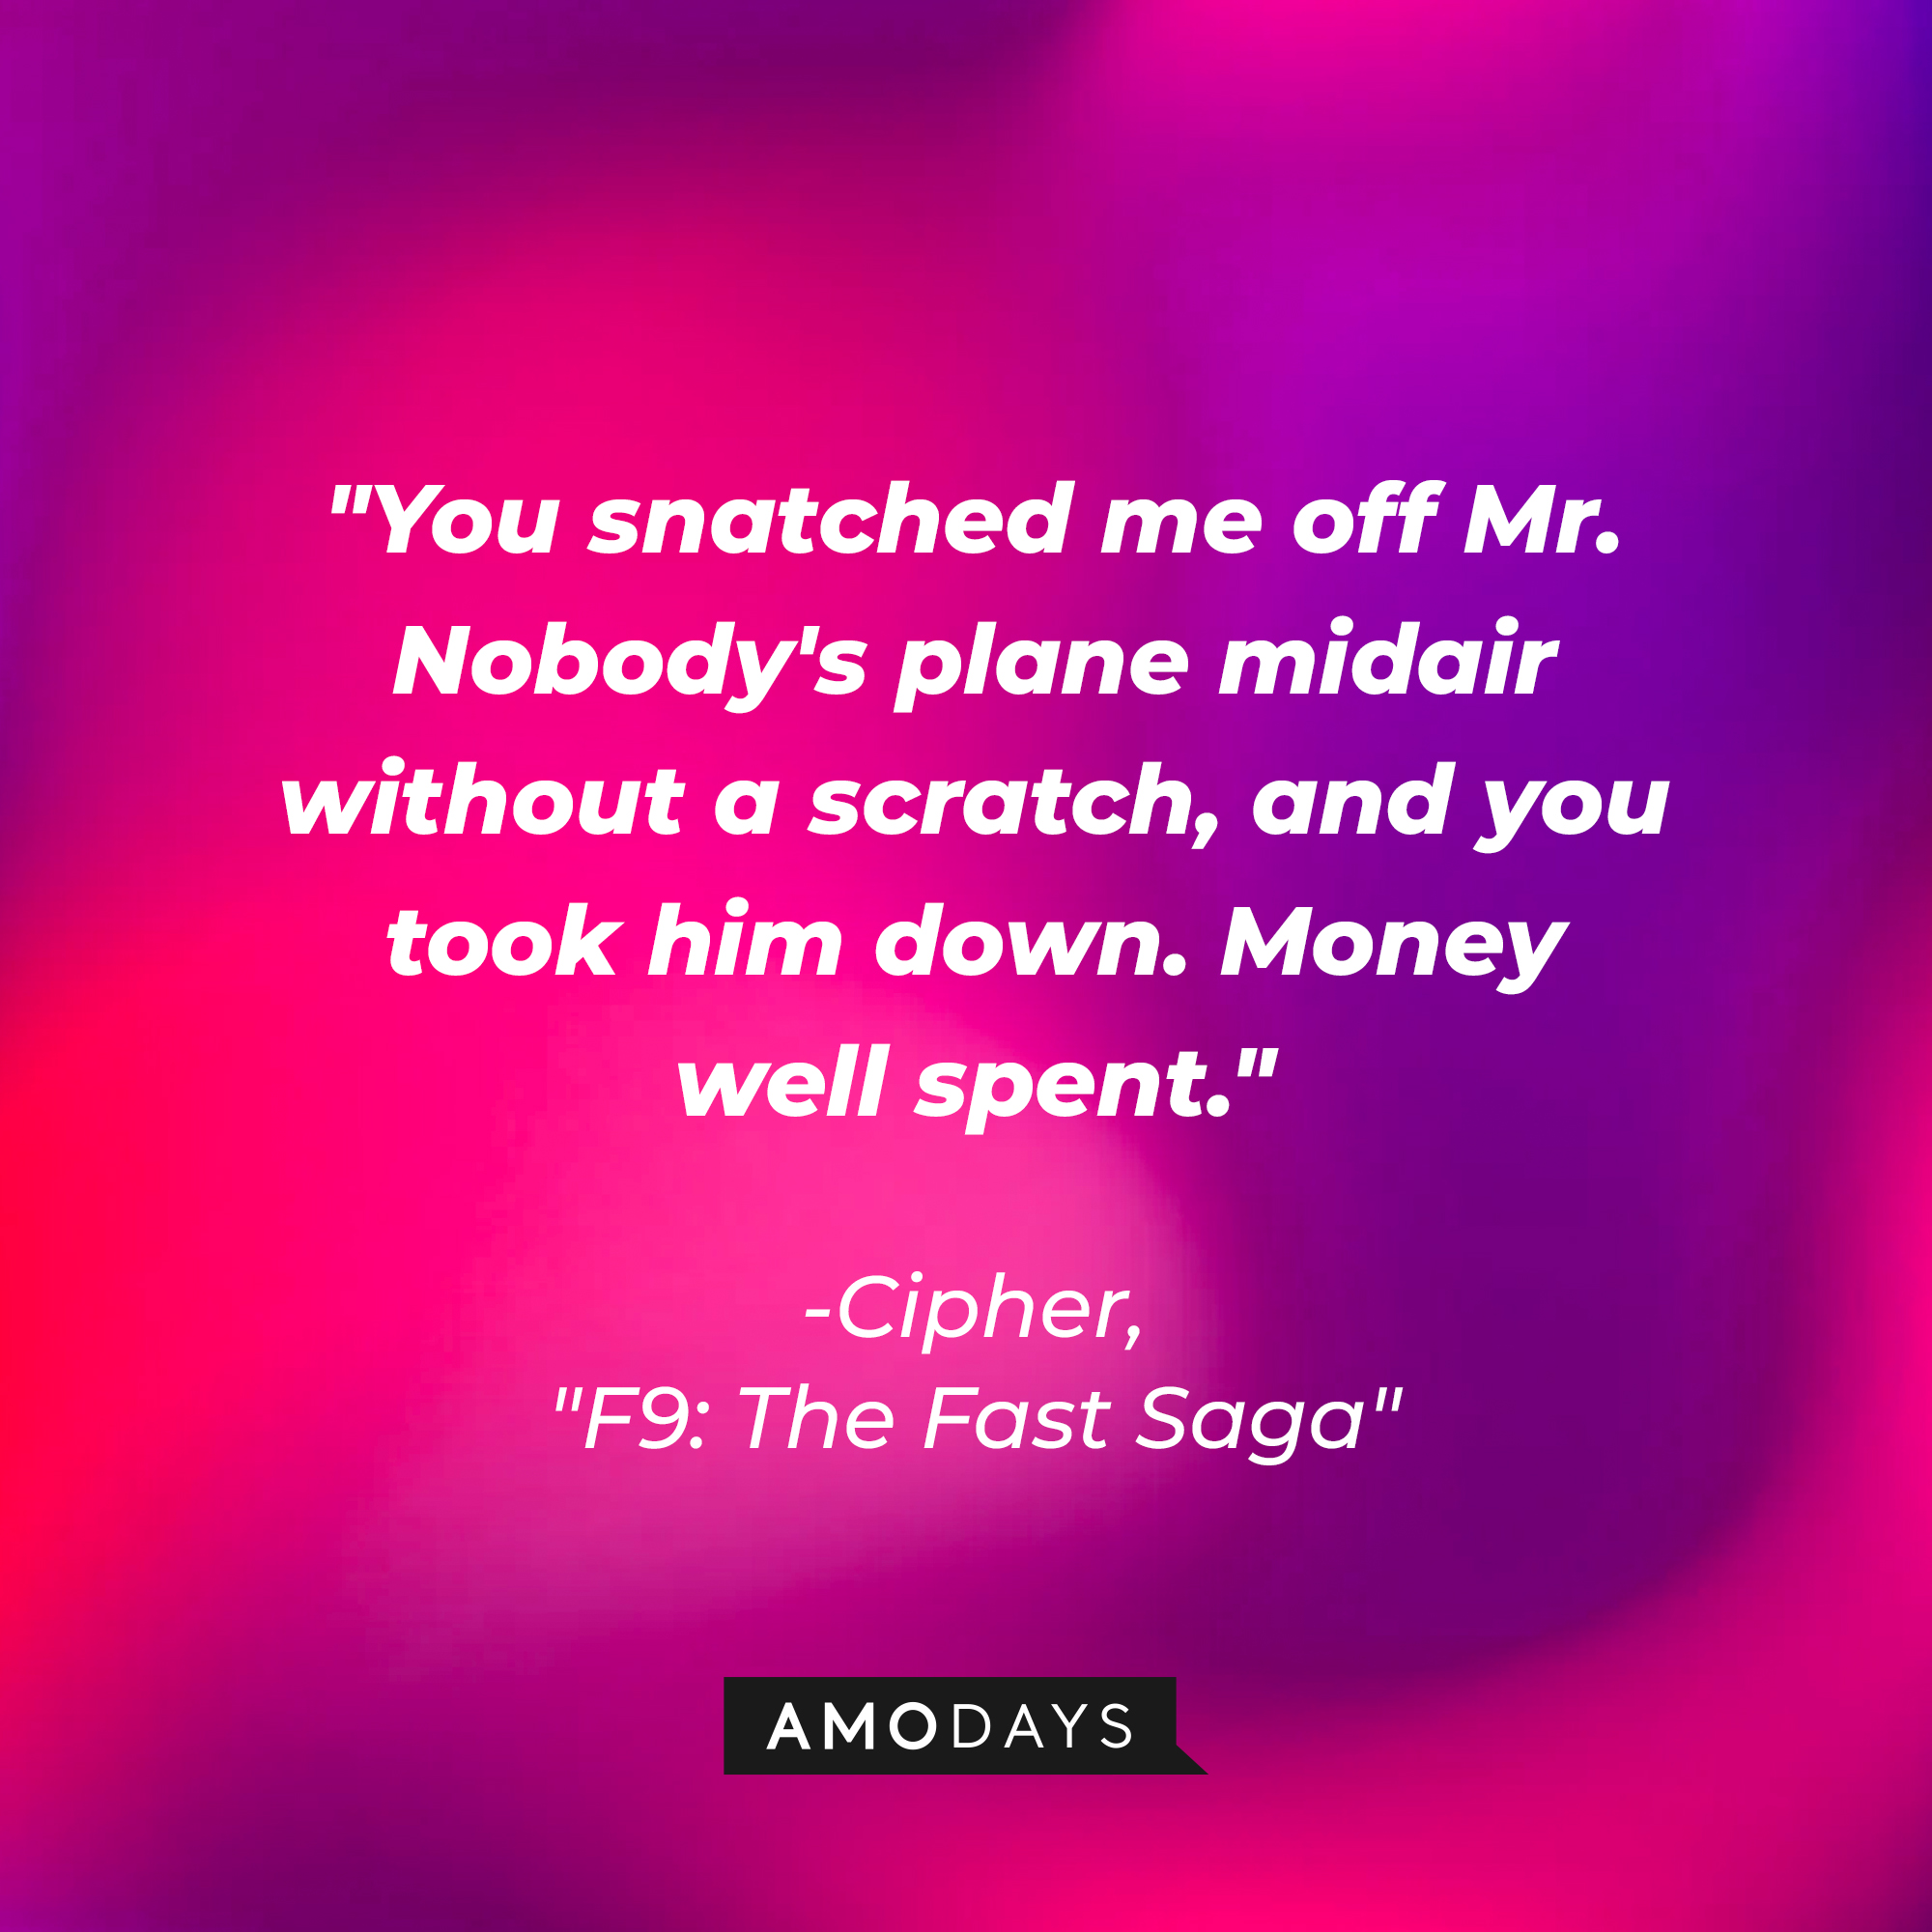 Cipher ‘s quote: "You snatched me off Mr. Nobody's plane midair without a scratch, and you took him down. Money well spent." | Image: AmoDays